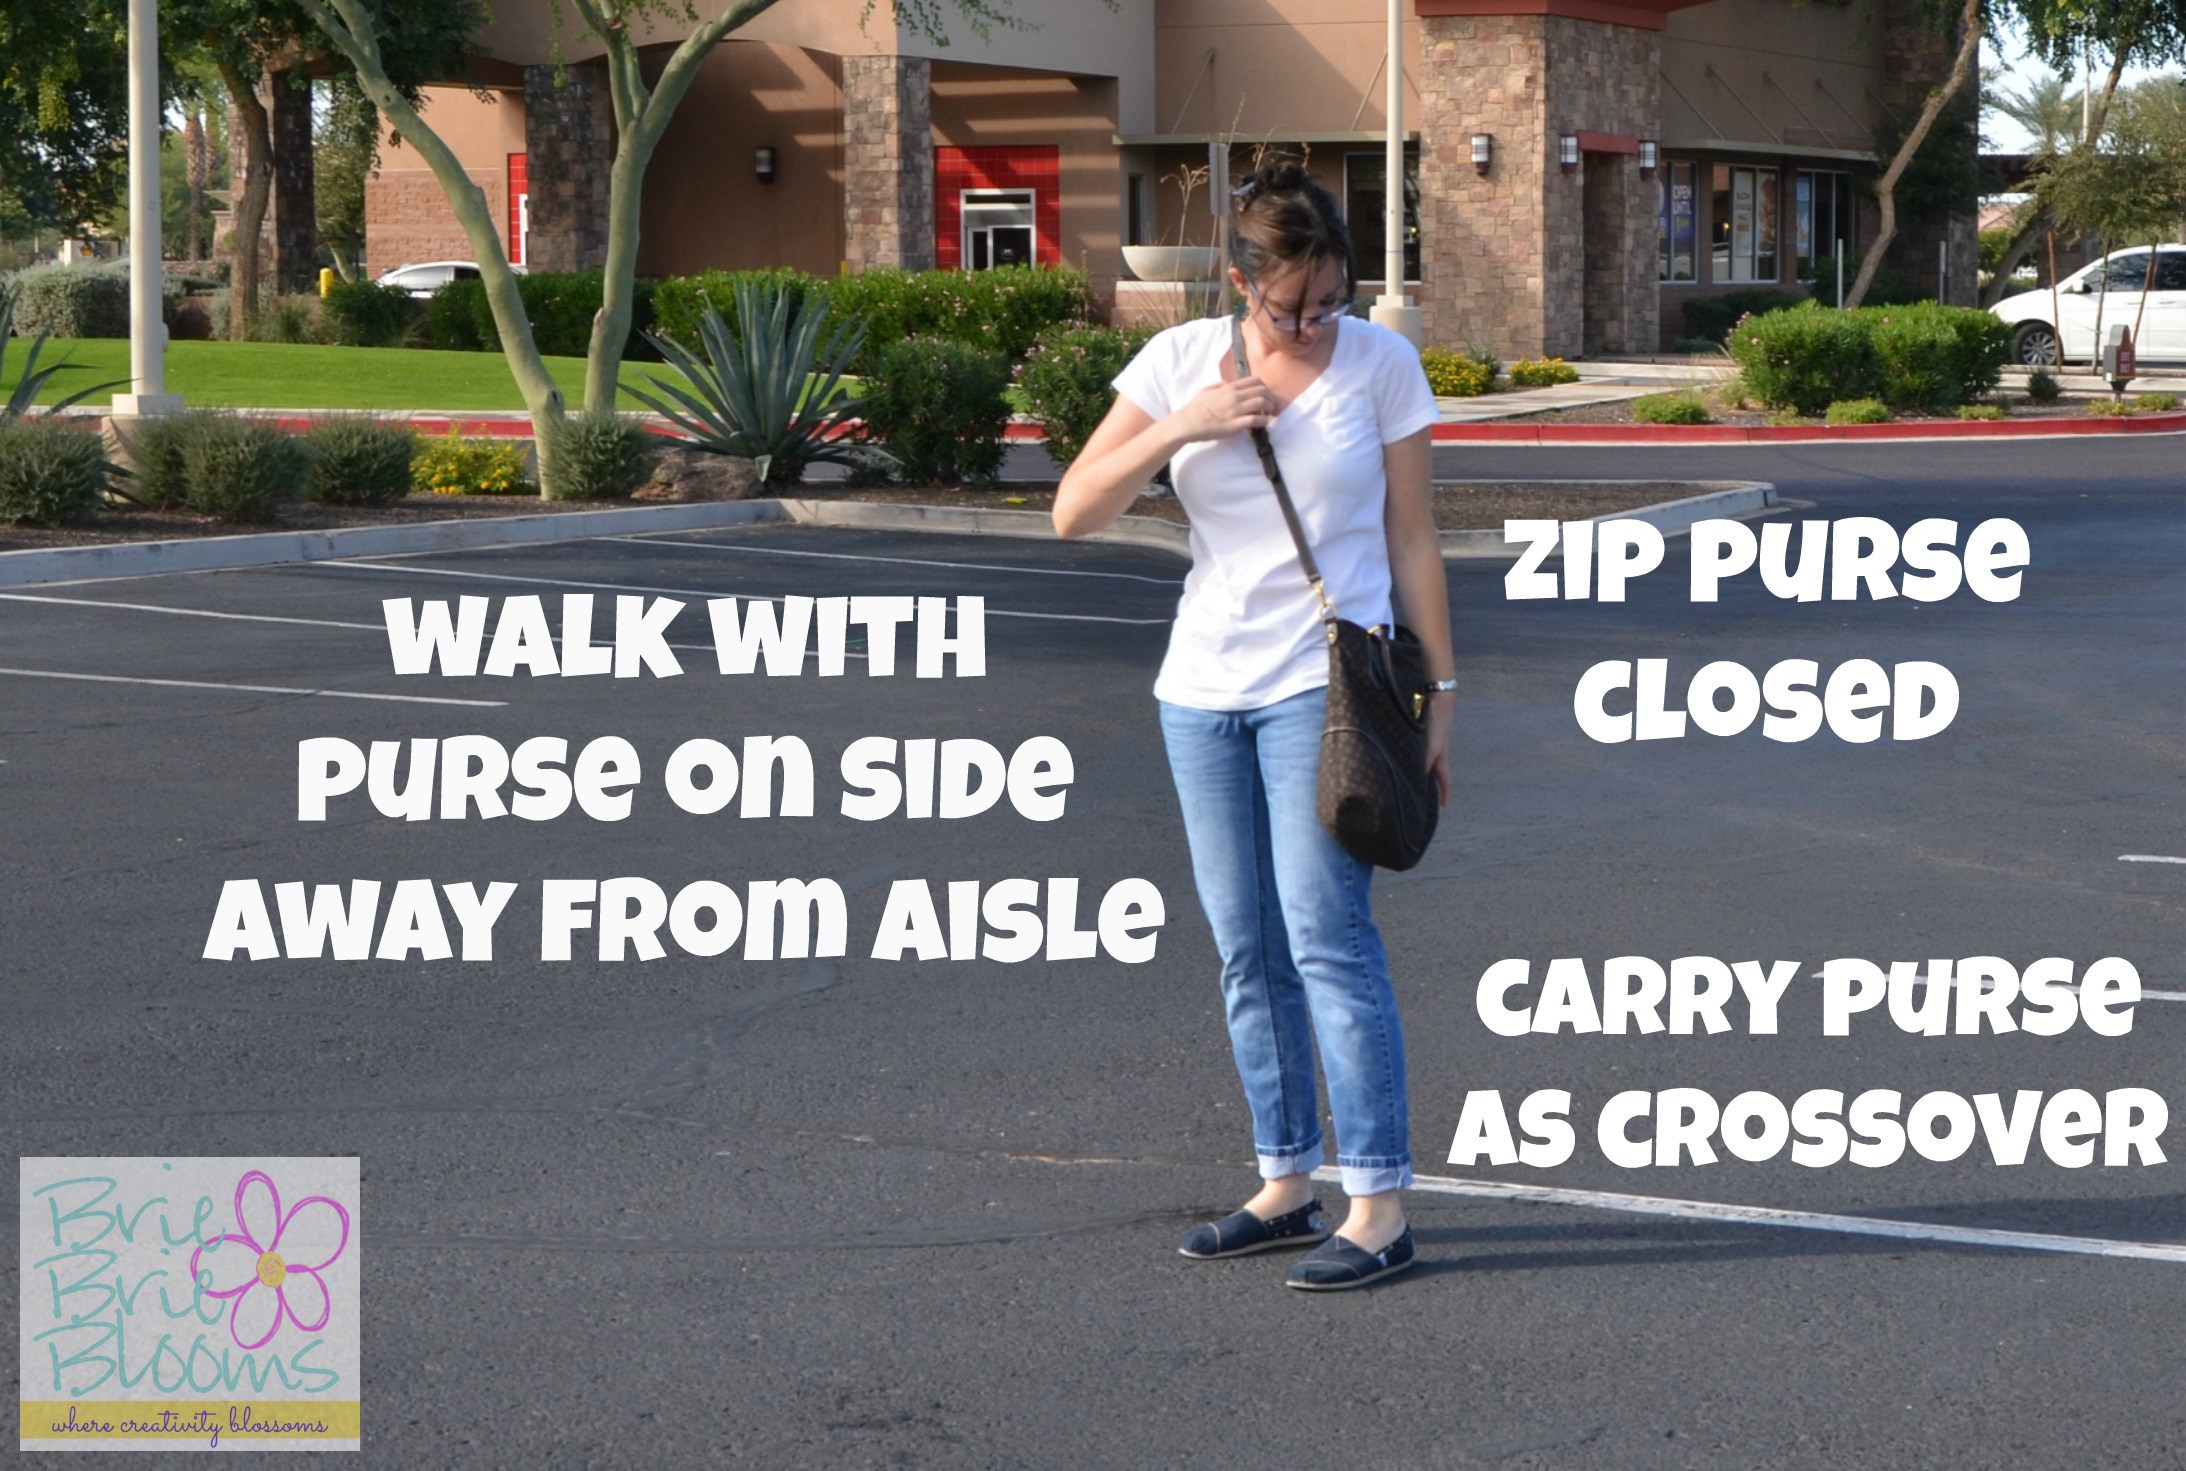 Holiday shopping safety tip - walking in a parking lot with a purse